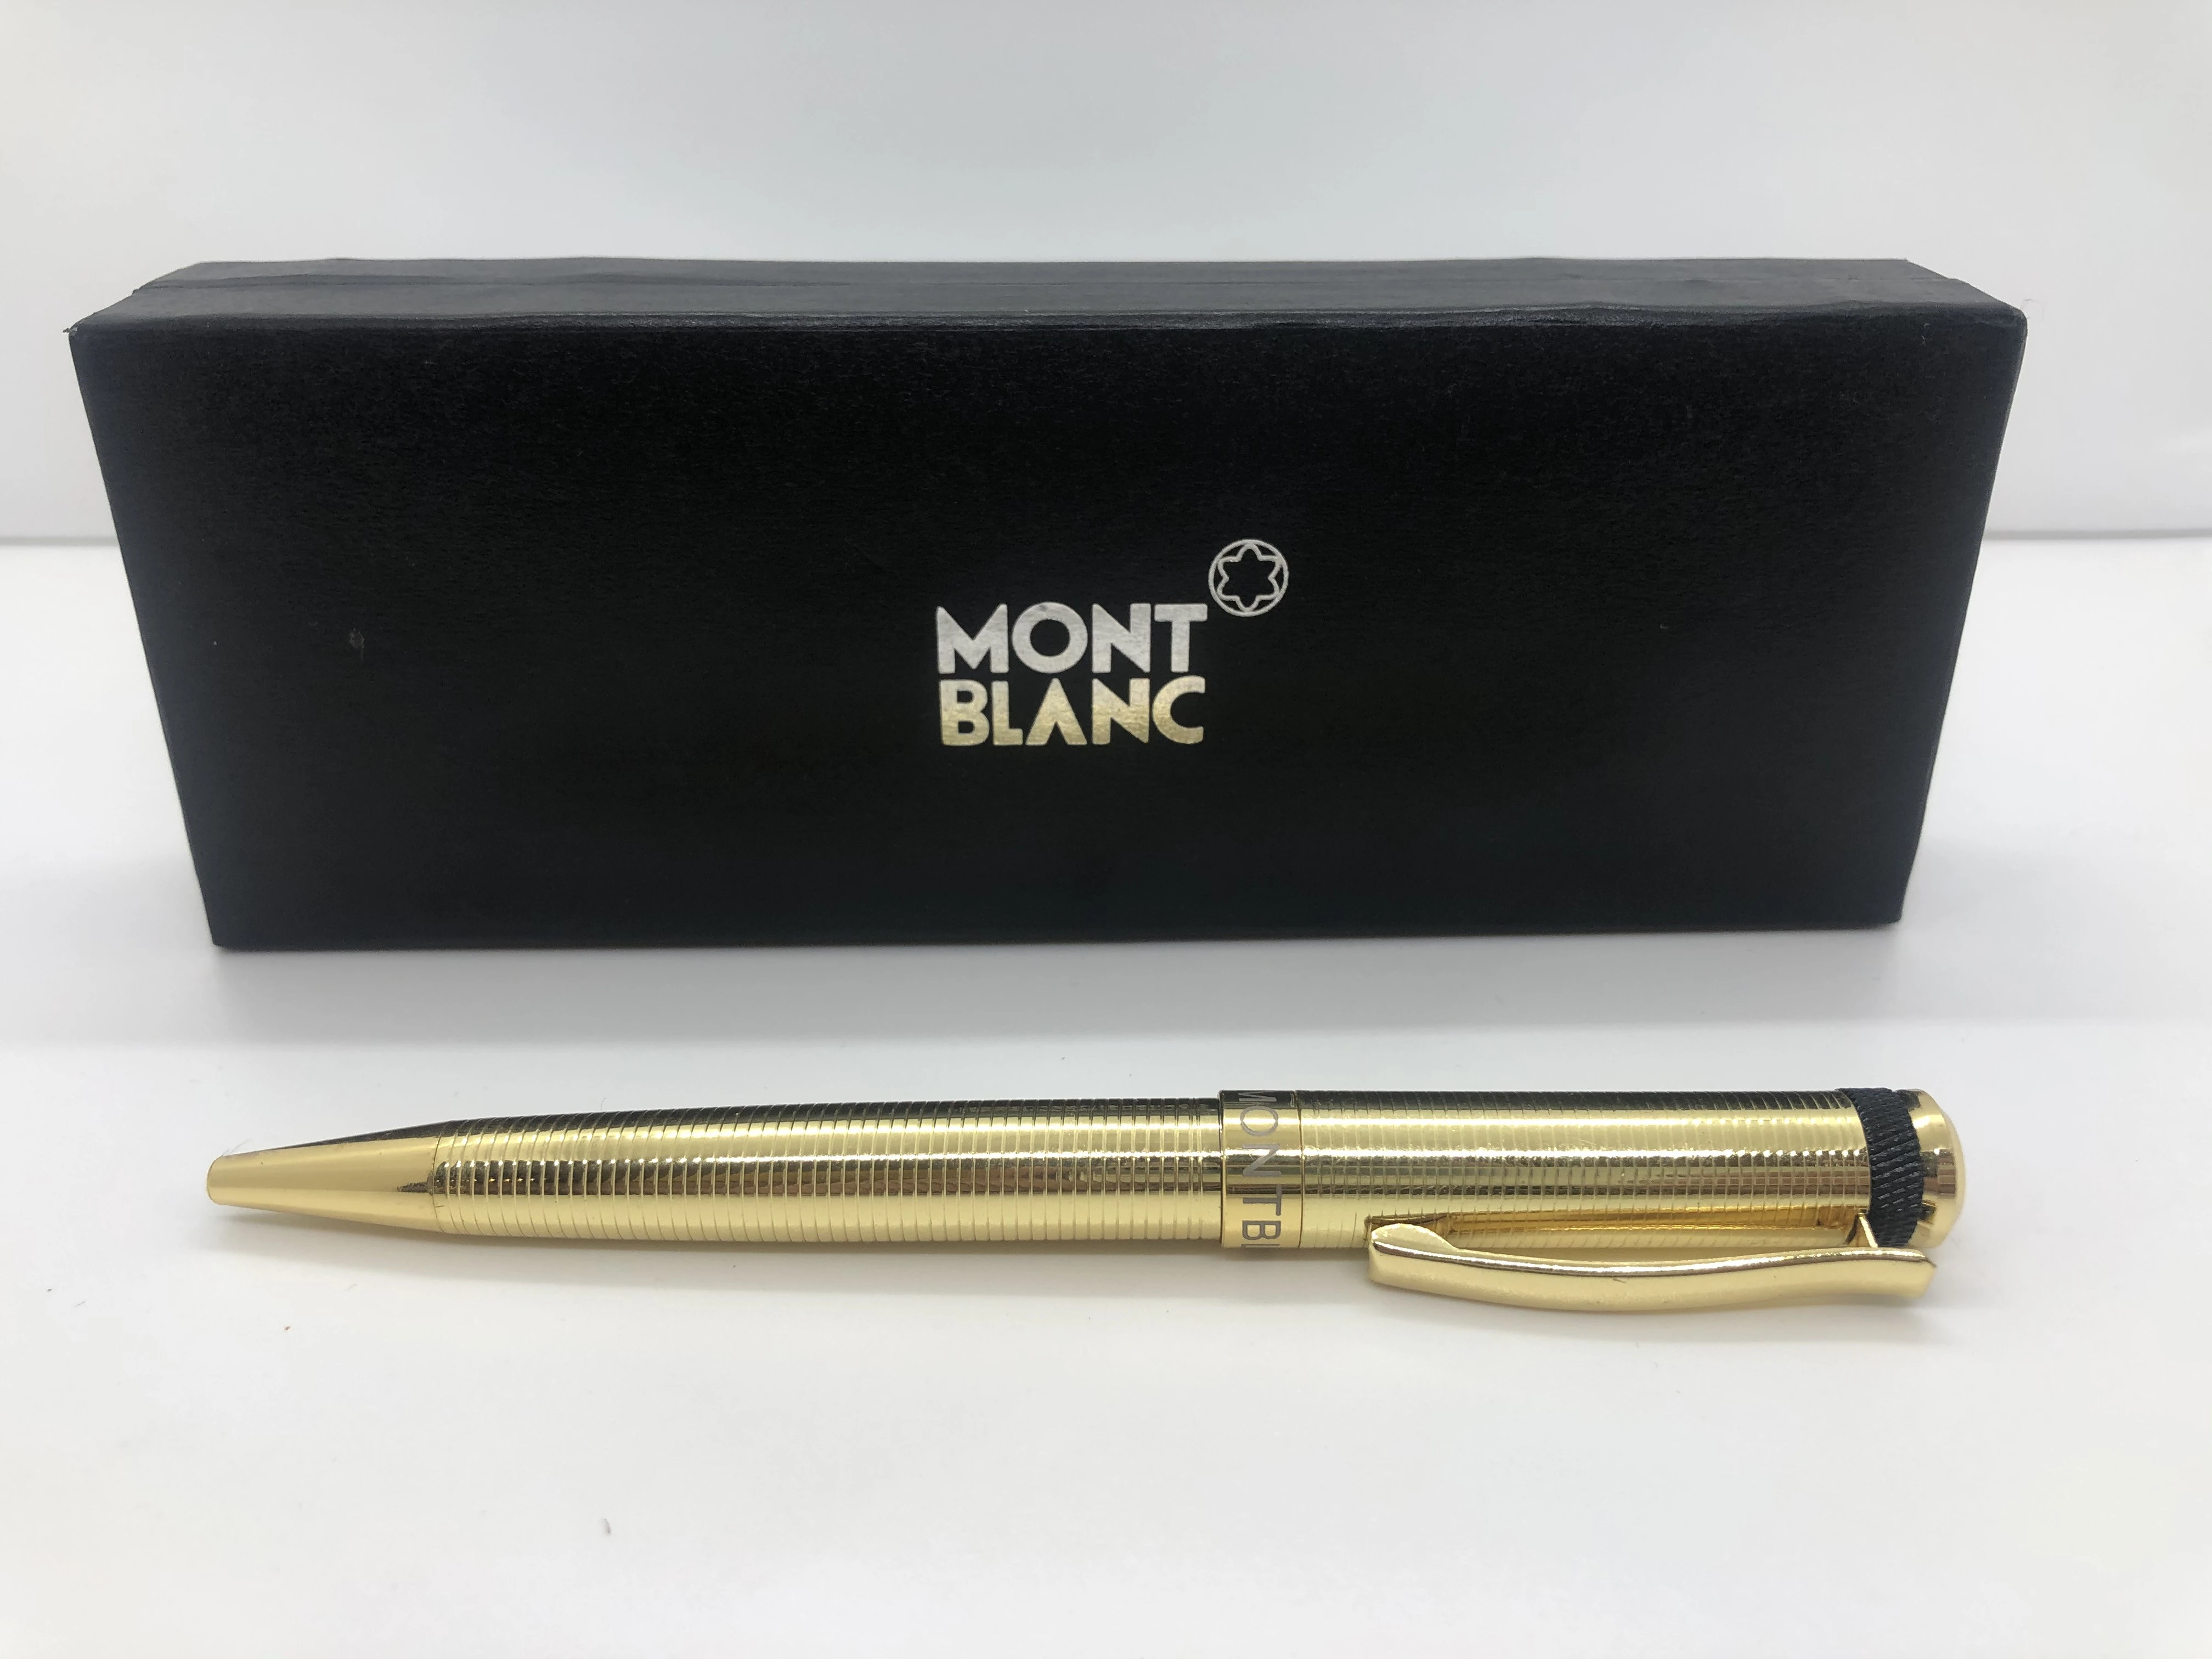 Mont Blanc golden pen - with engraved touches - with the star brand logo on the top engraved in the rotation